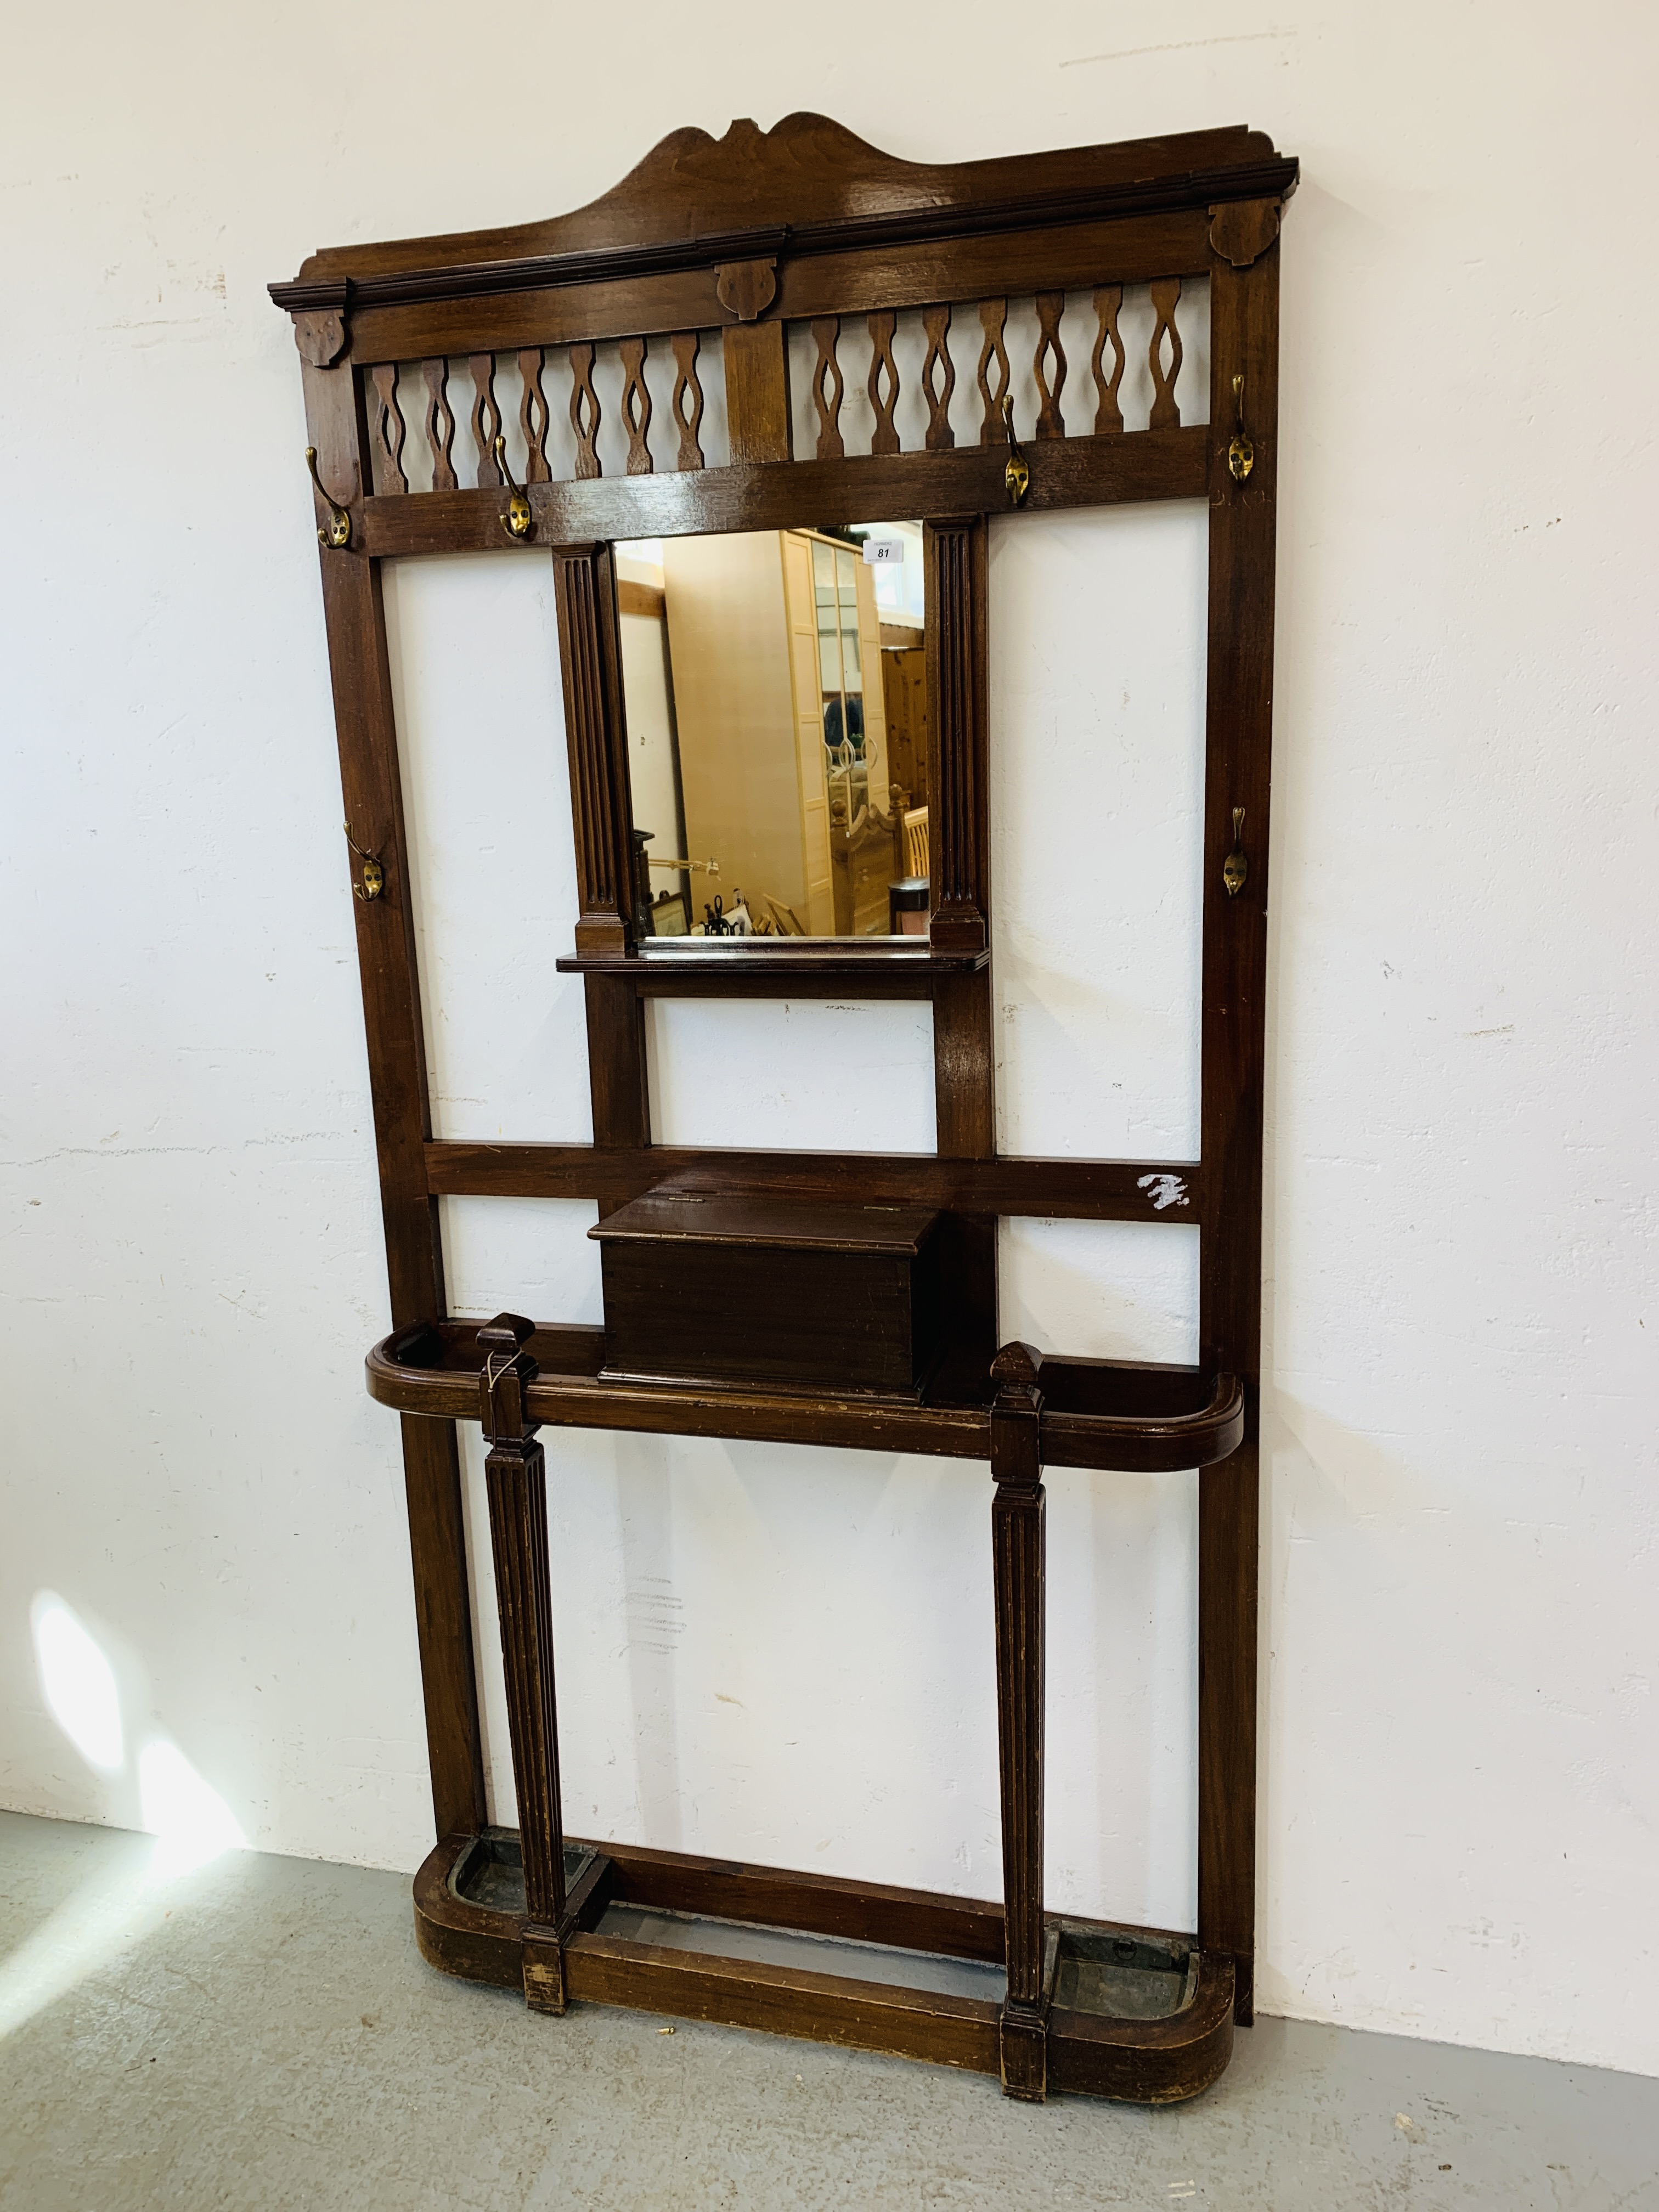 A MAHOGANY HALL STAND WITH CENTRAL MIRROR AND GLOVE BOX. W 99CM. D 19CM. H 195CM.